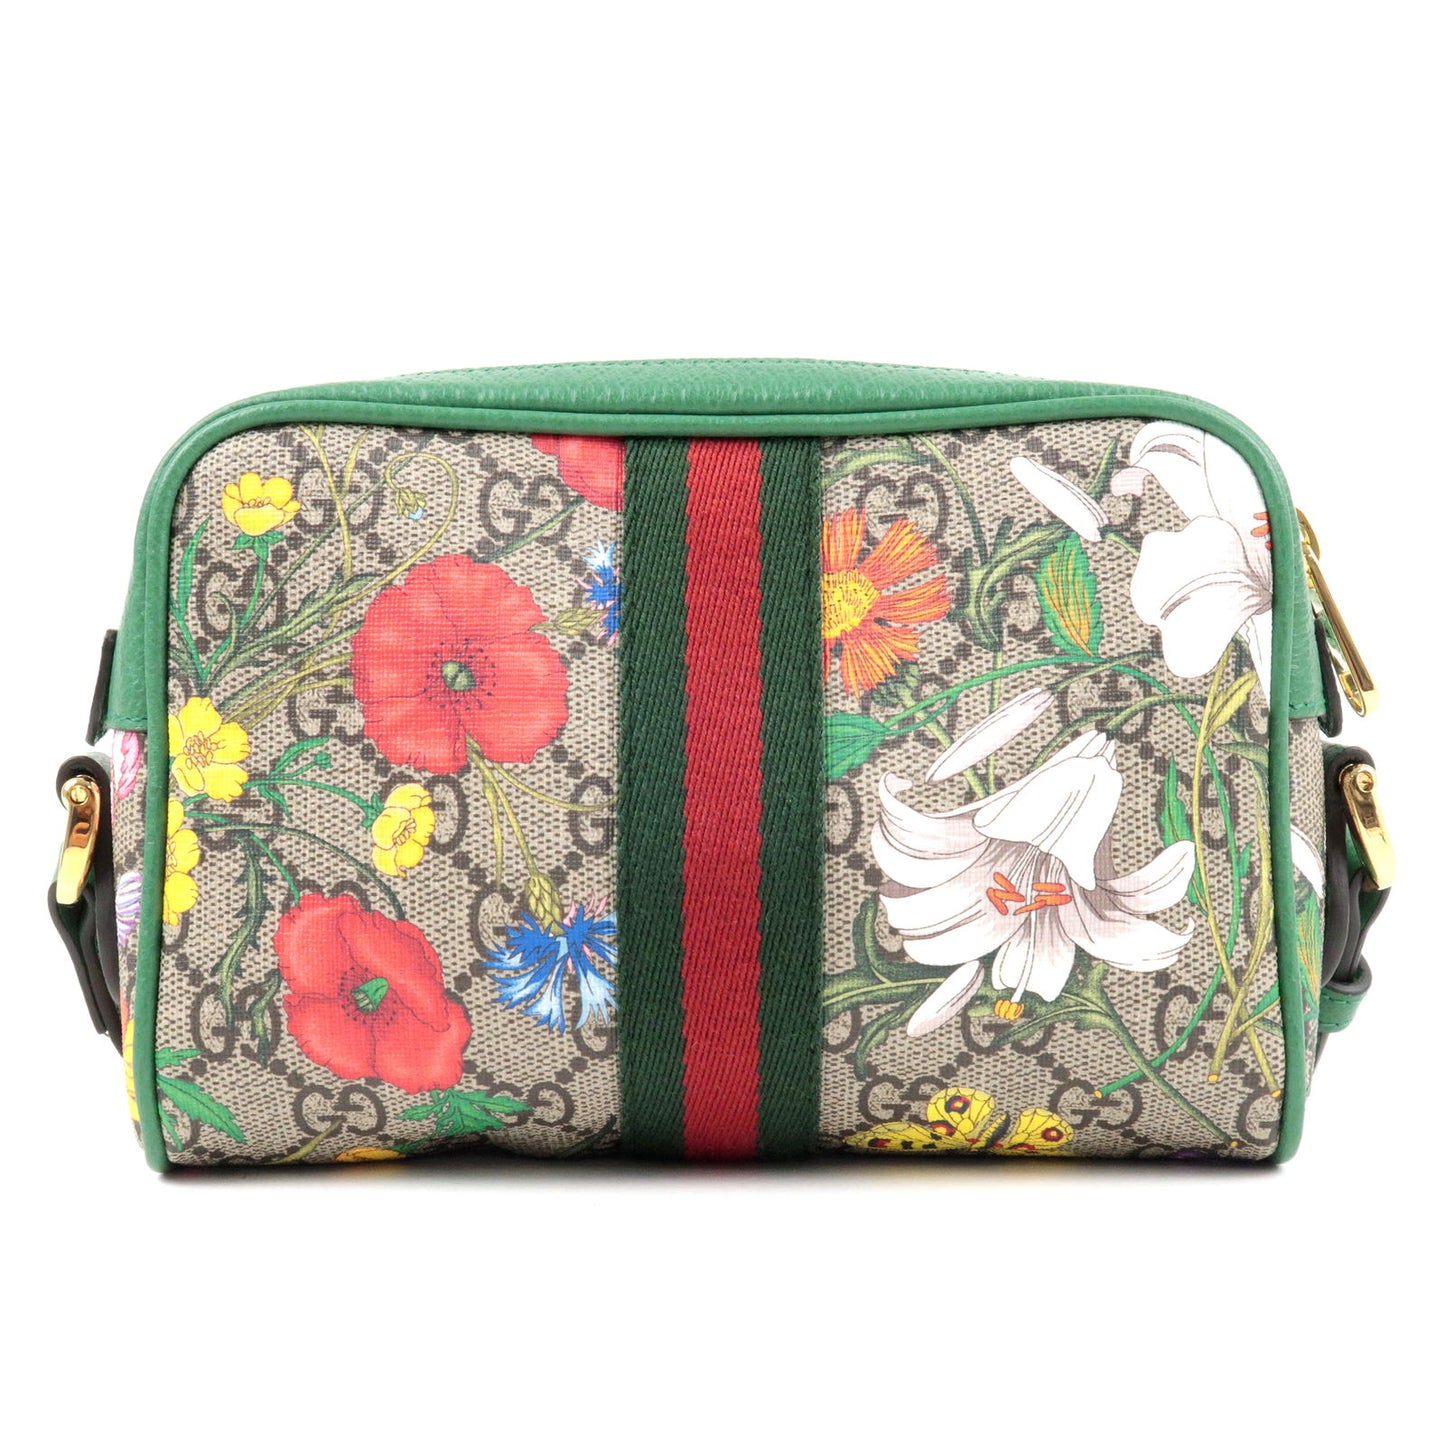 GUCCI Ophidia GG Flora Supreme Leather Crossbody Bag 517350